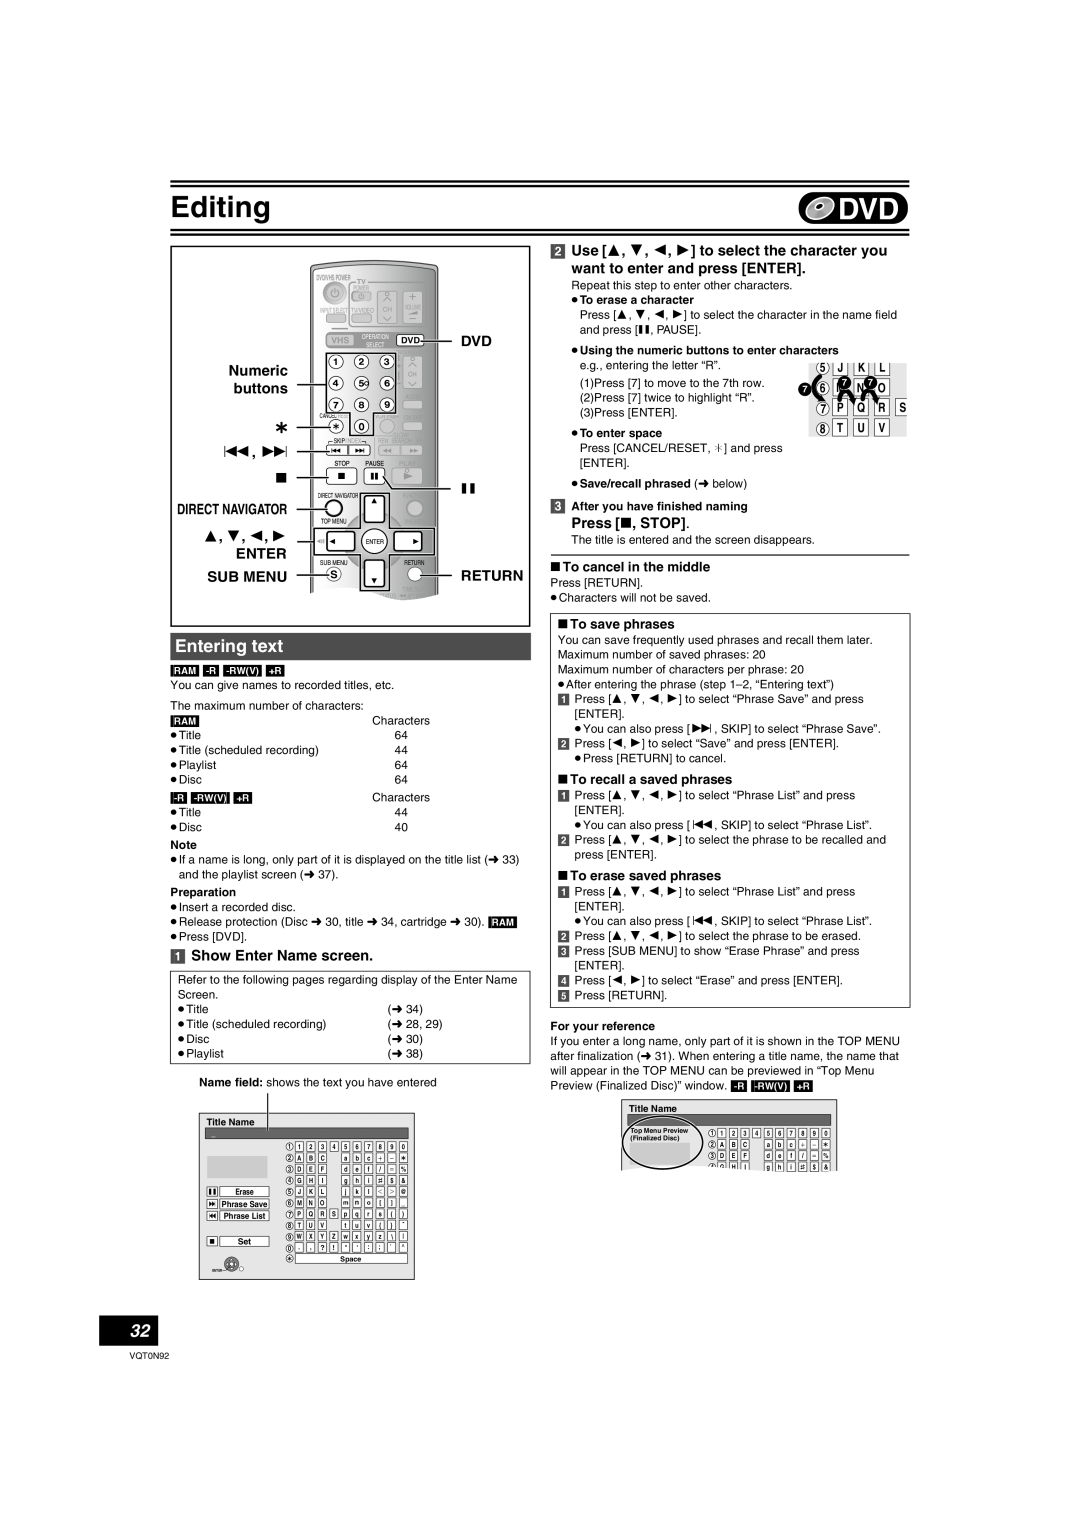 Panasonic DMR-ES30V Entering text, Use 3, 4, 2, 1 to select the character you, want to enter and press ENTER, 3 4 2 